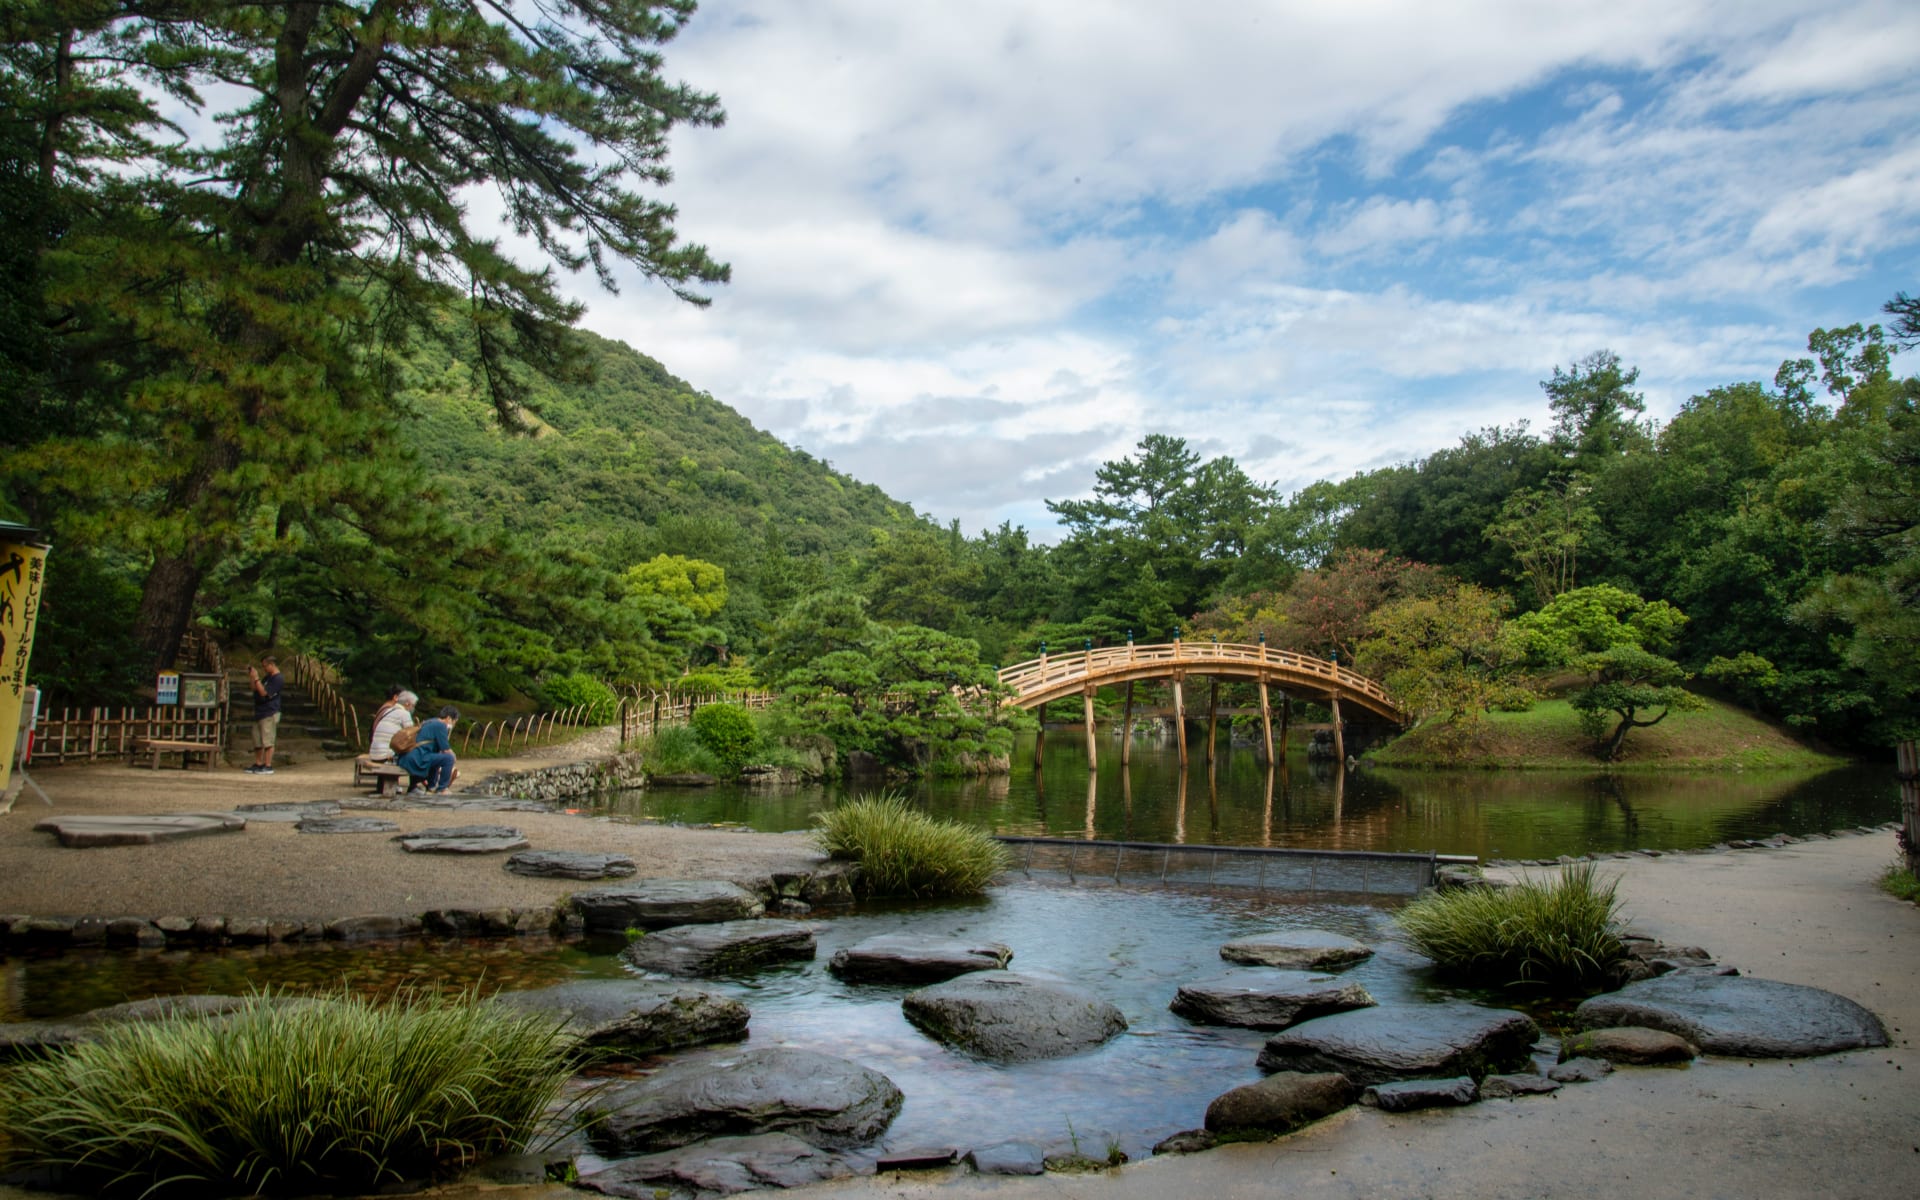 A couple are sitting on a wooden bench in Takamatsu park, overlooking a bridge and river.